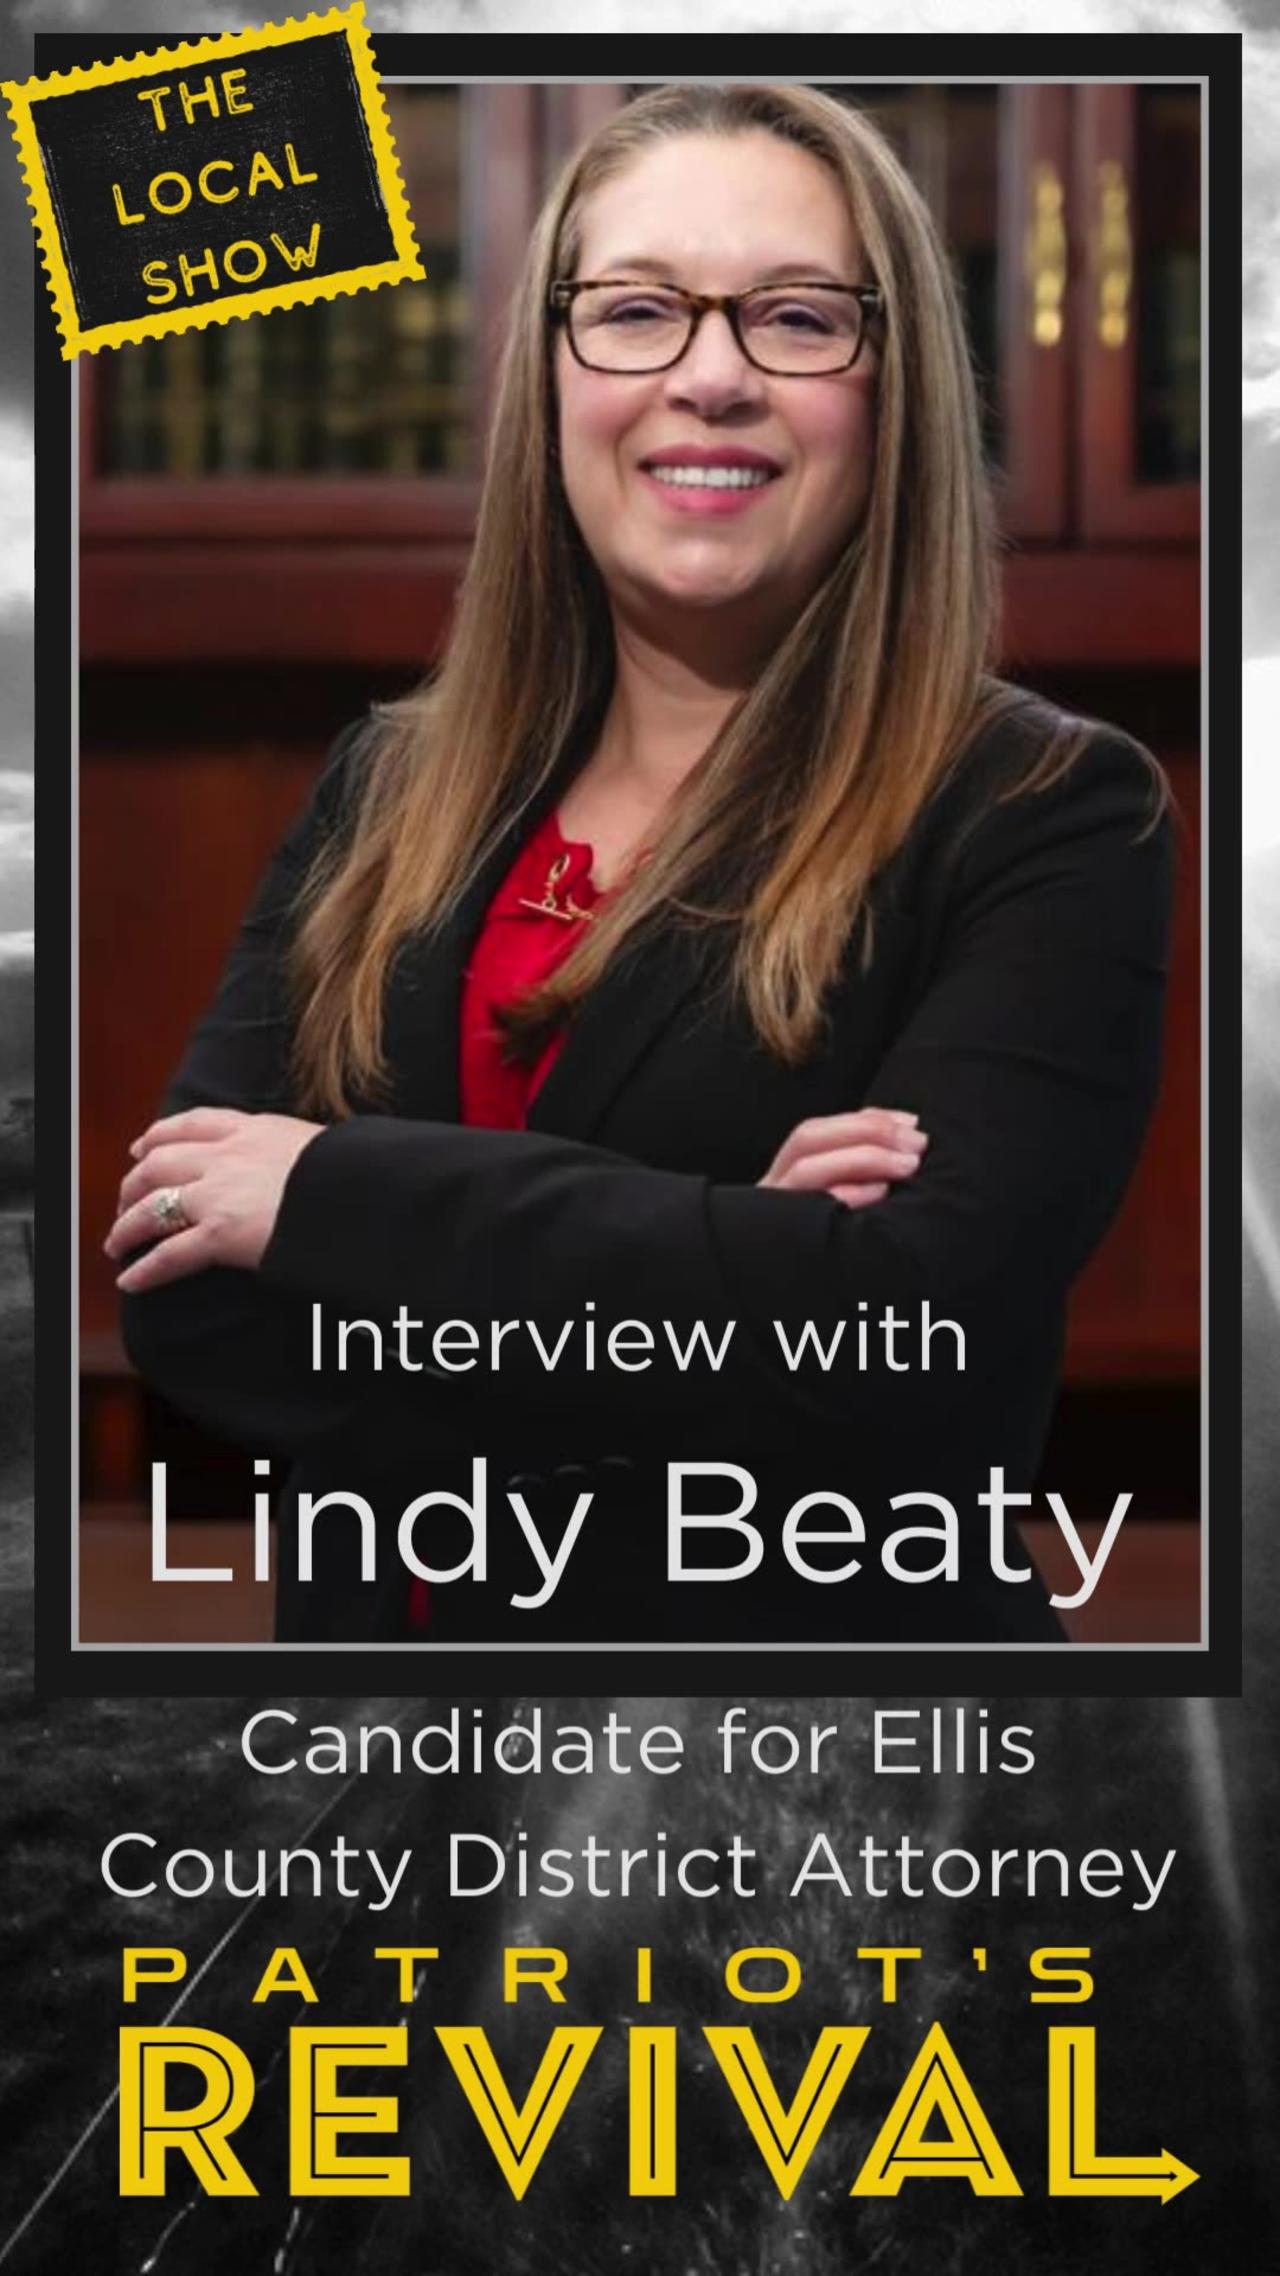 Lindy Beaty's Campaign Promise for Ellis County DA Position